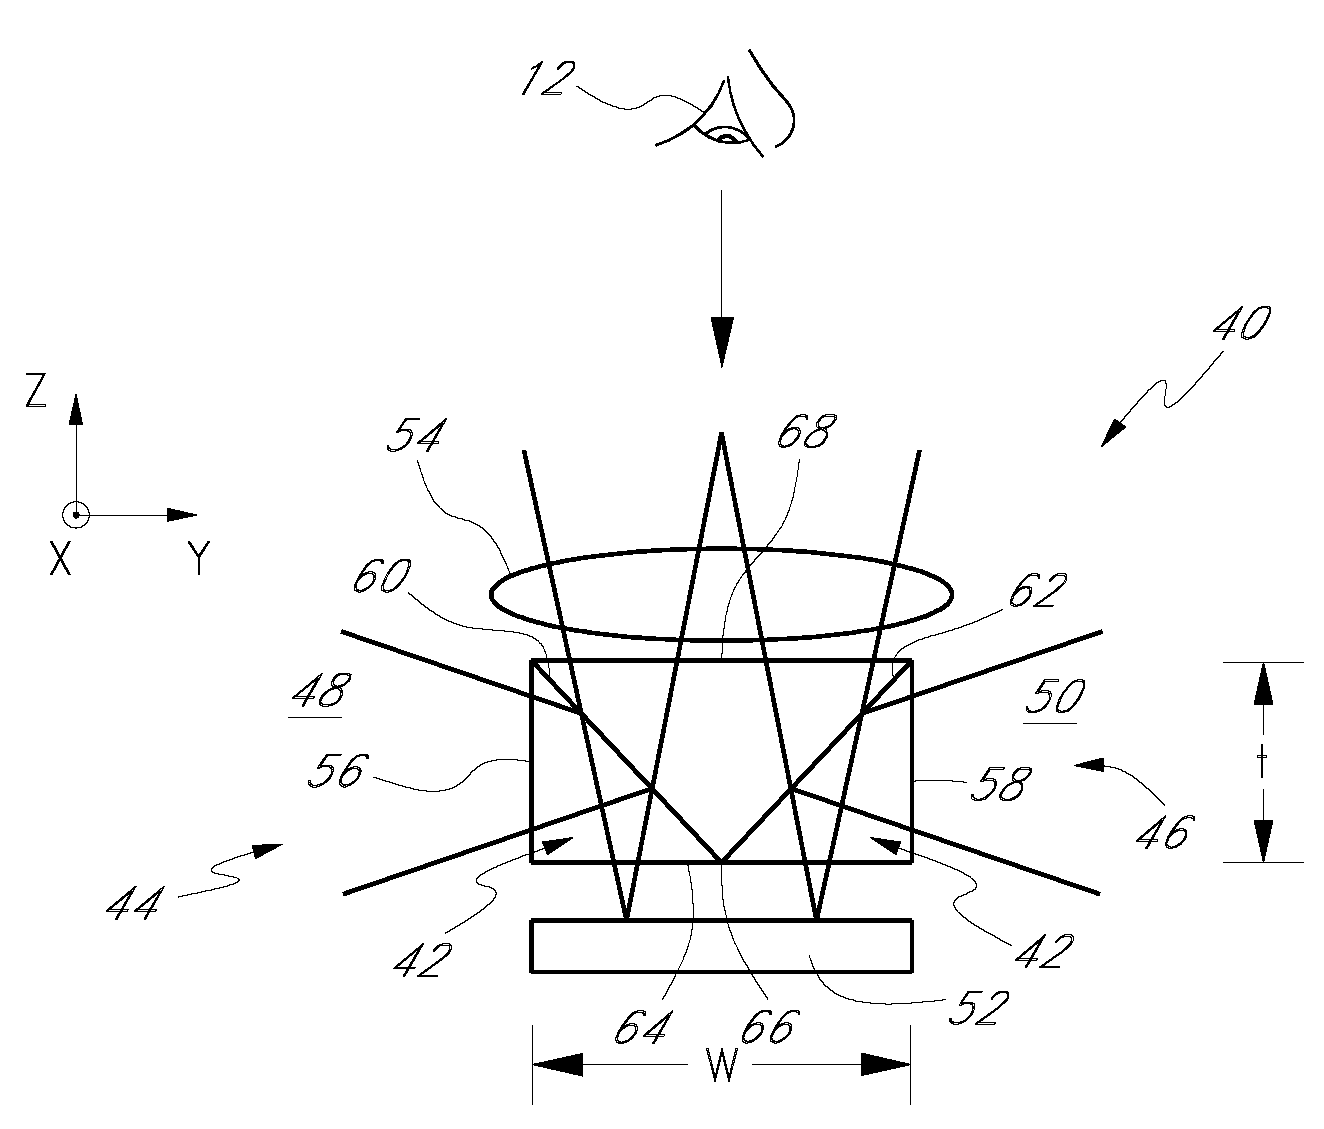 Beamsplitting structures and methods in optical systems